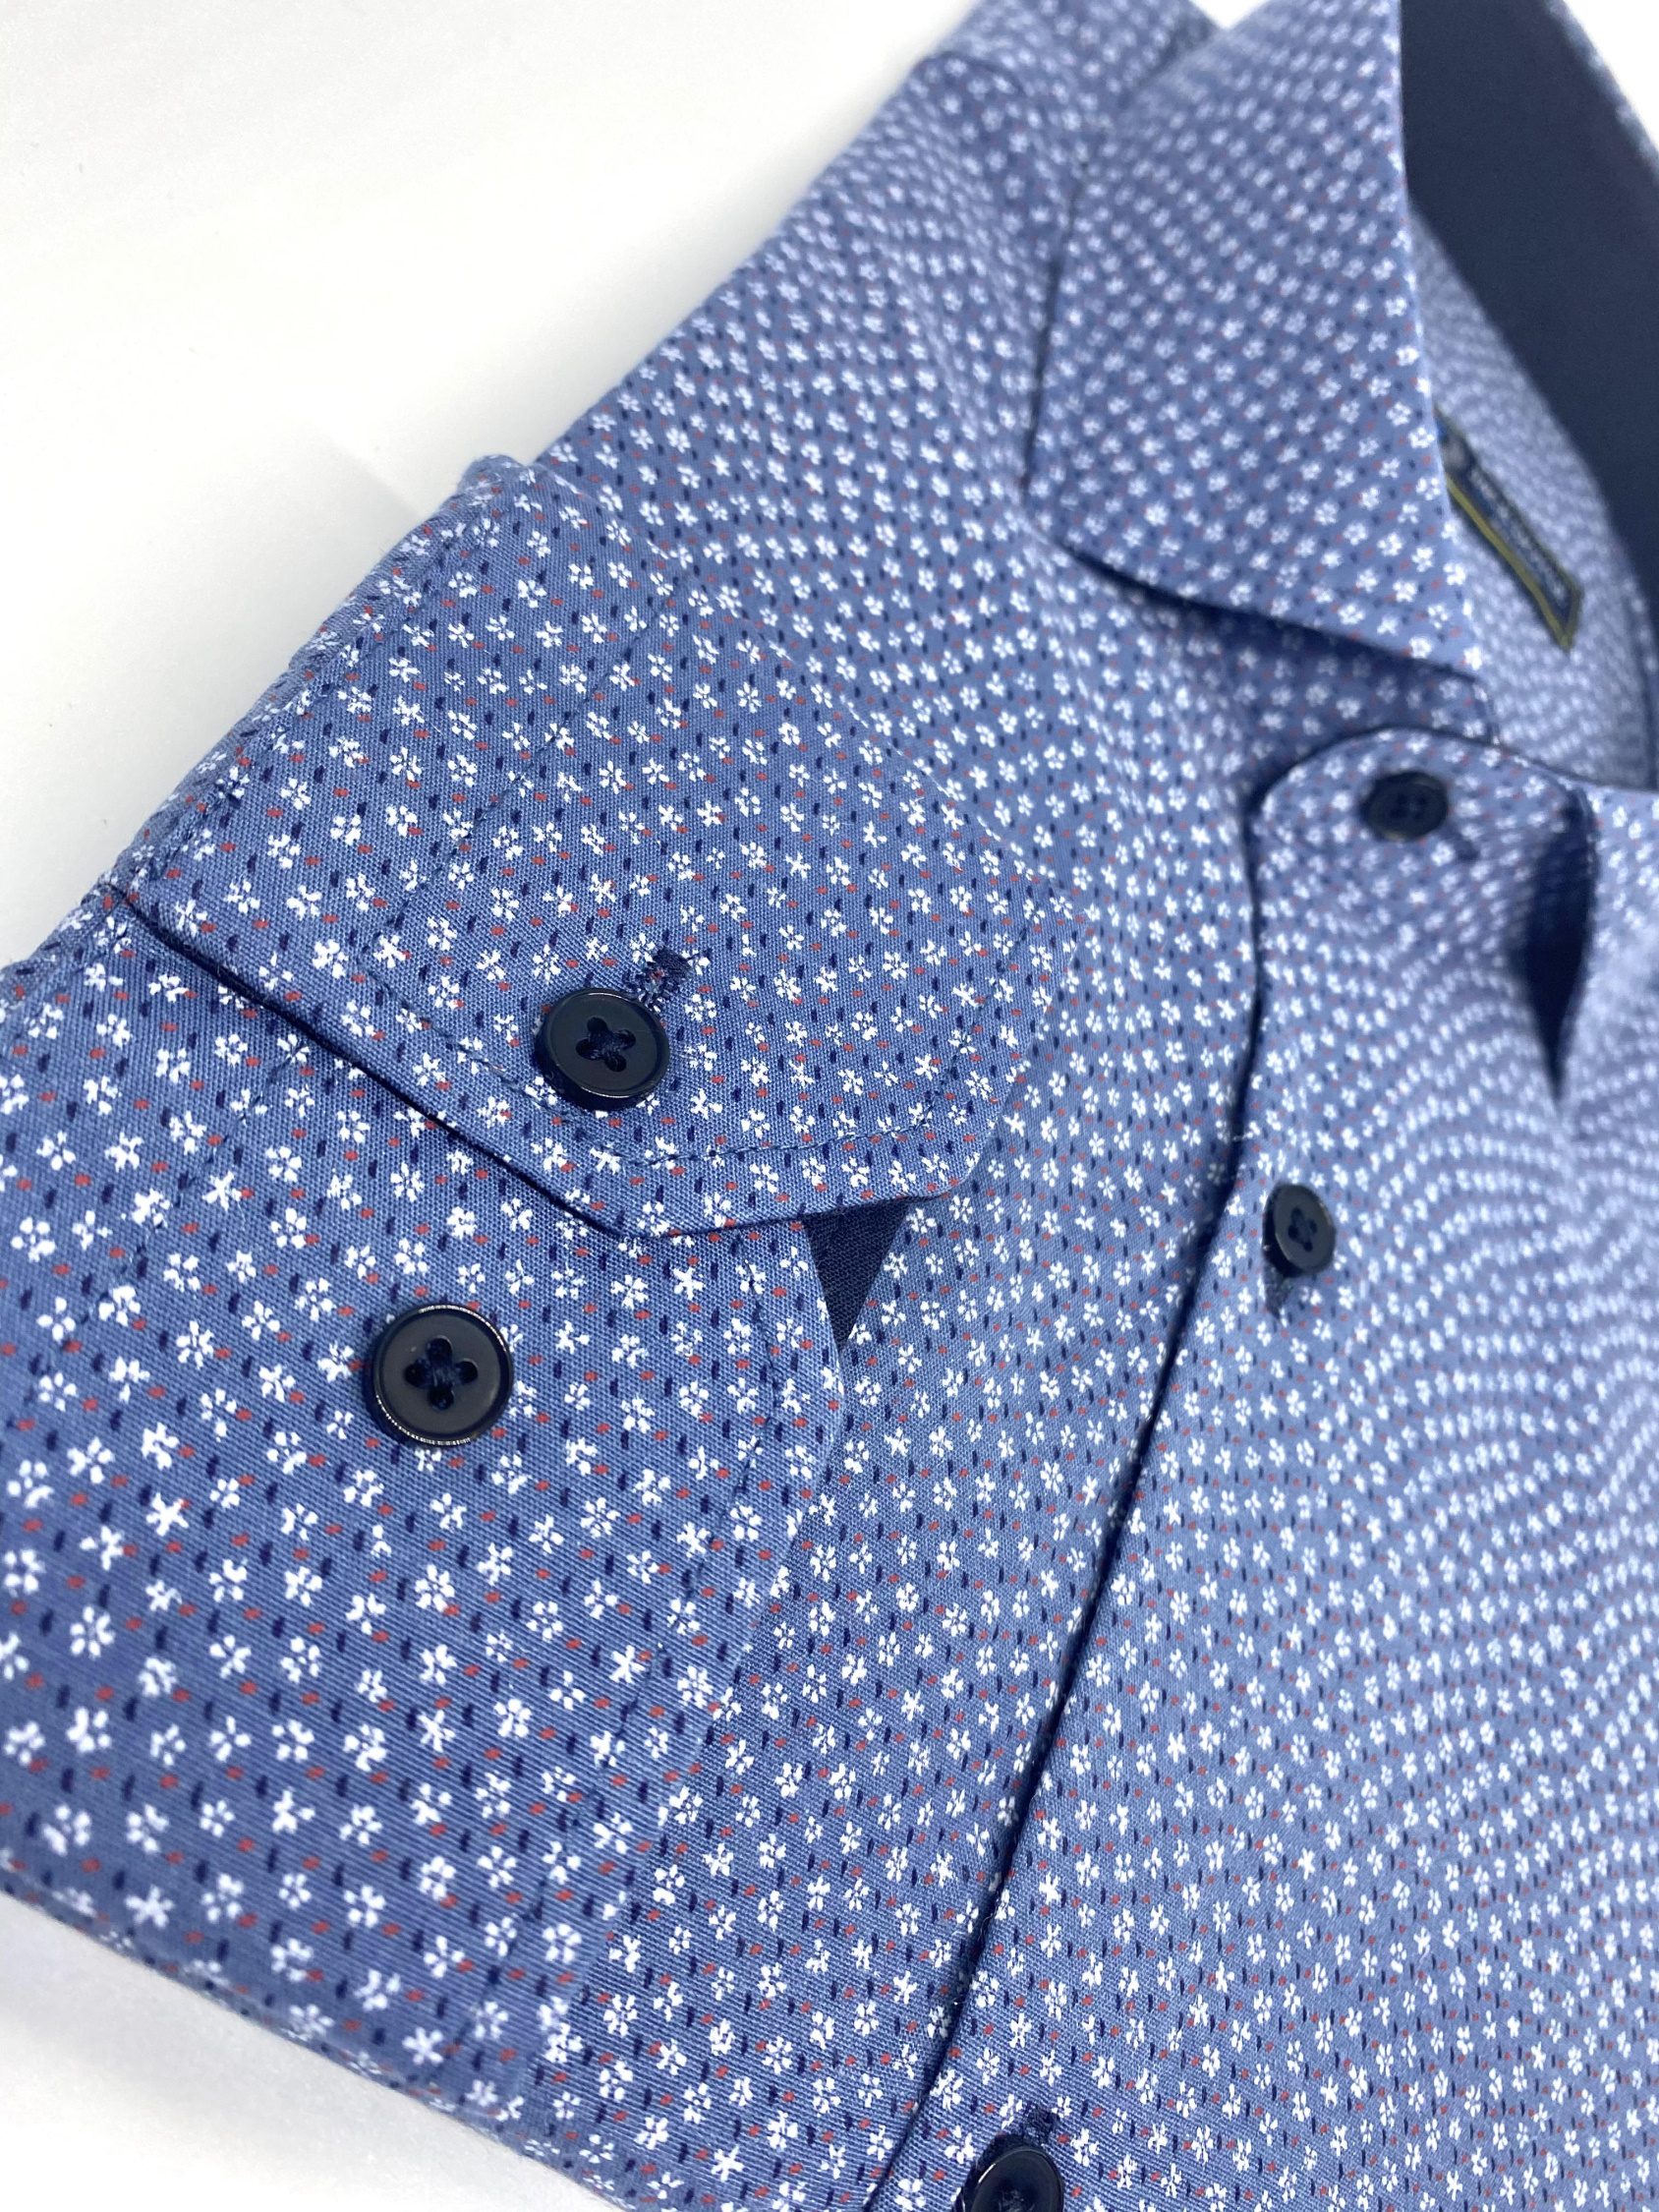 Blue Shirt With White Floral Print | Suits.ie